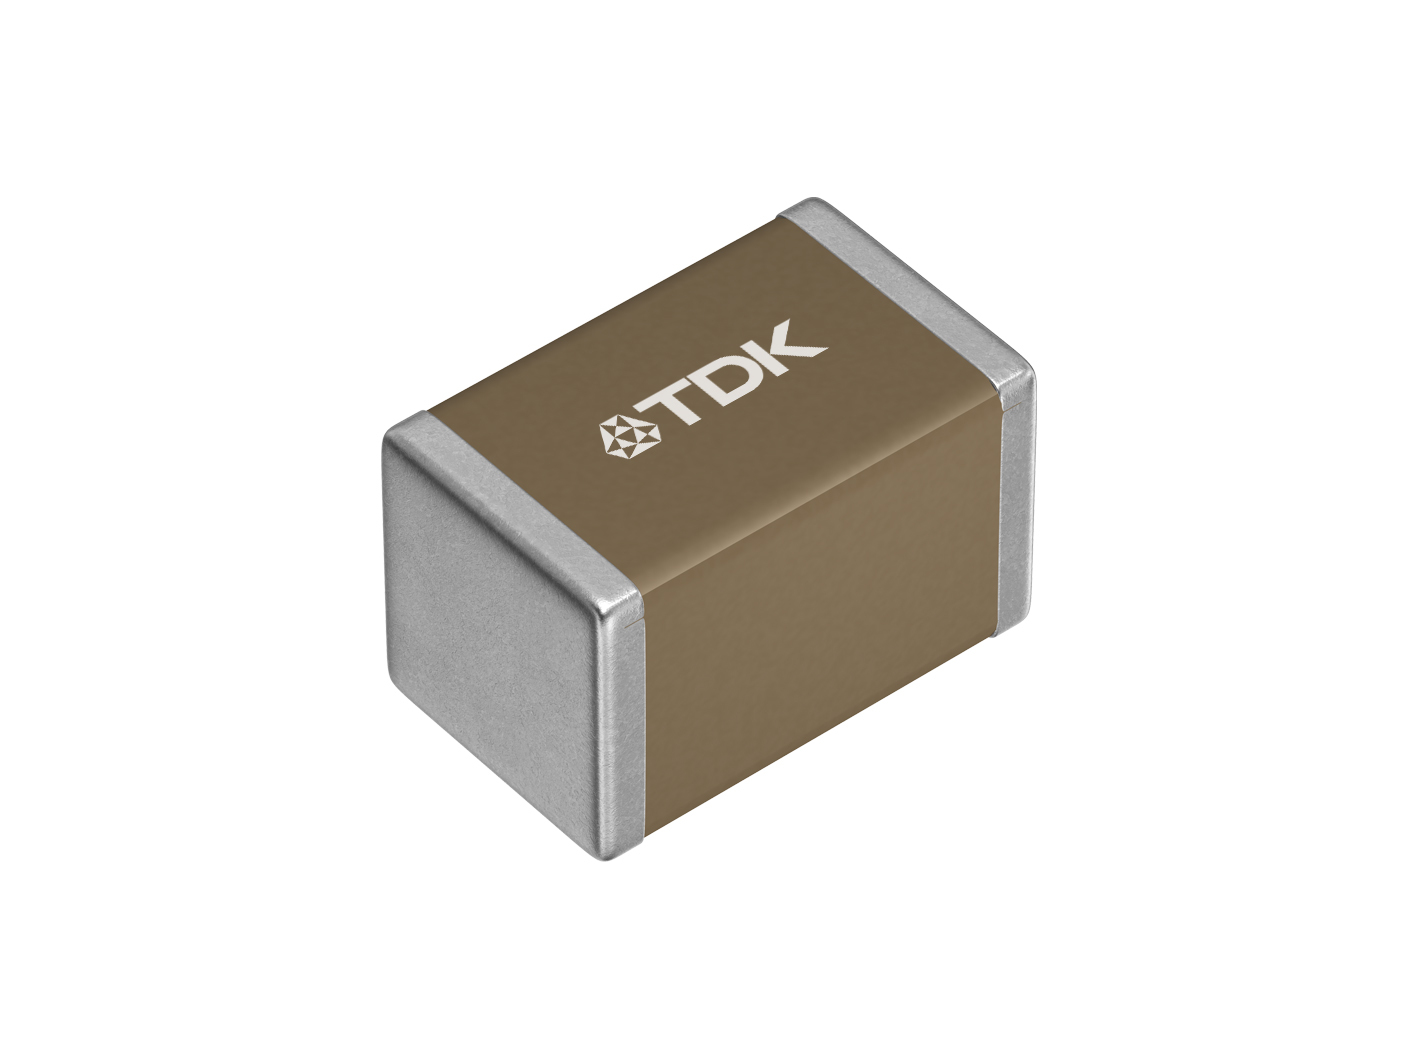 TDK Expands Automotive MLCC Lineup with the Industry's Highest Capacitance at 100V in 2012/3216 Sizes